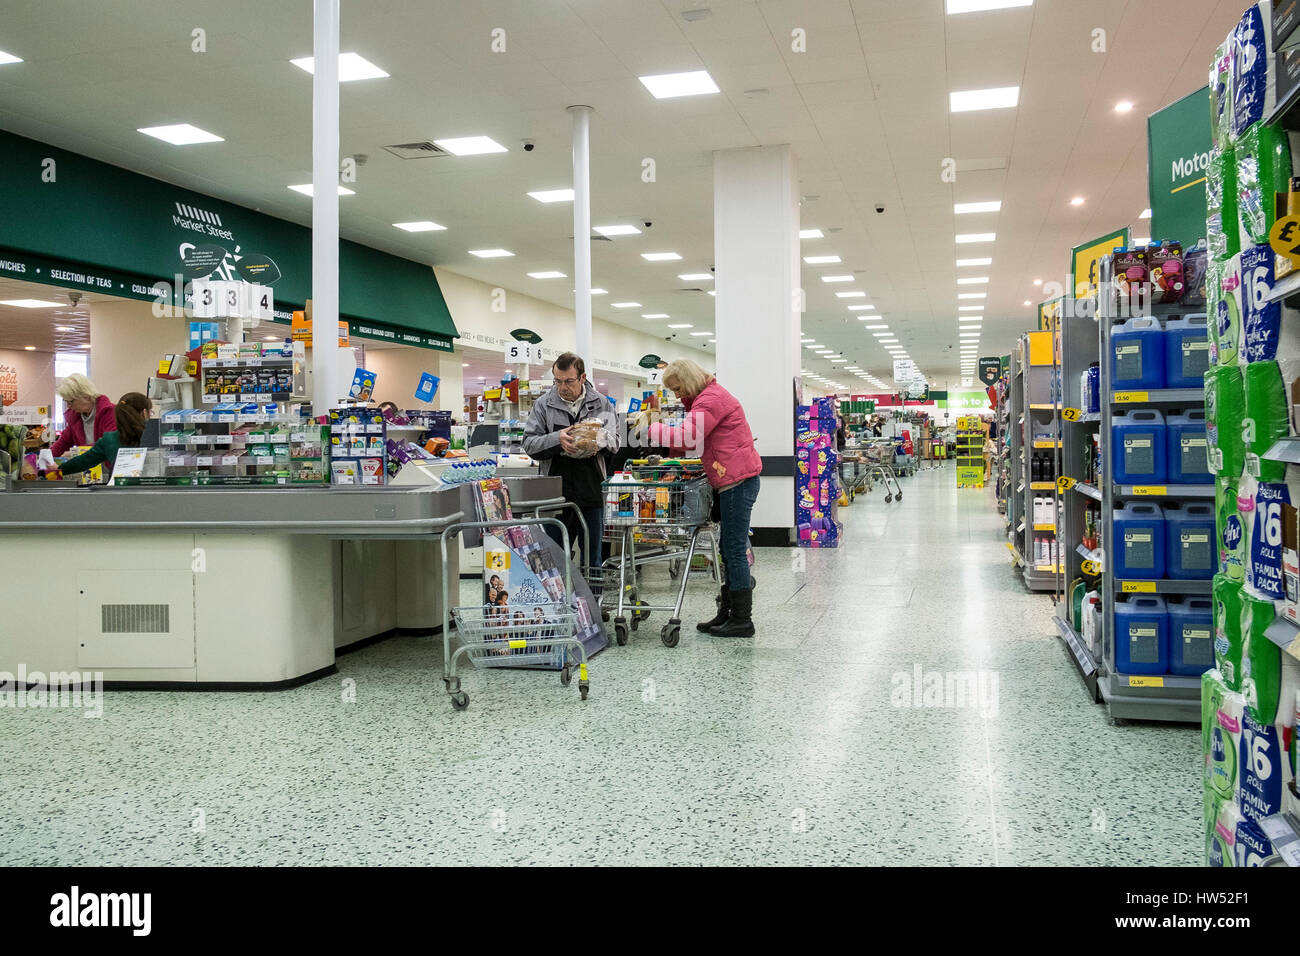 Morrisons Supermarket Checkout Customers Retail Store Stock Photo